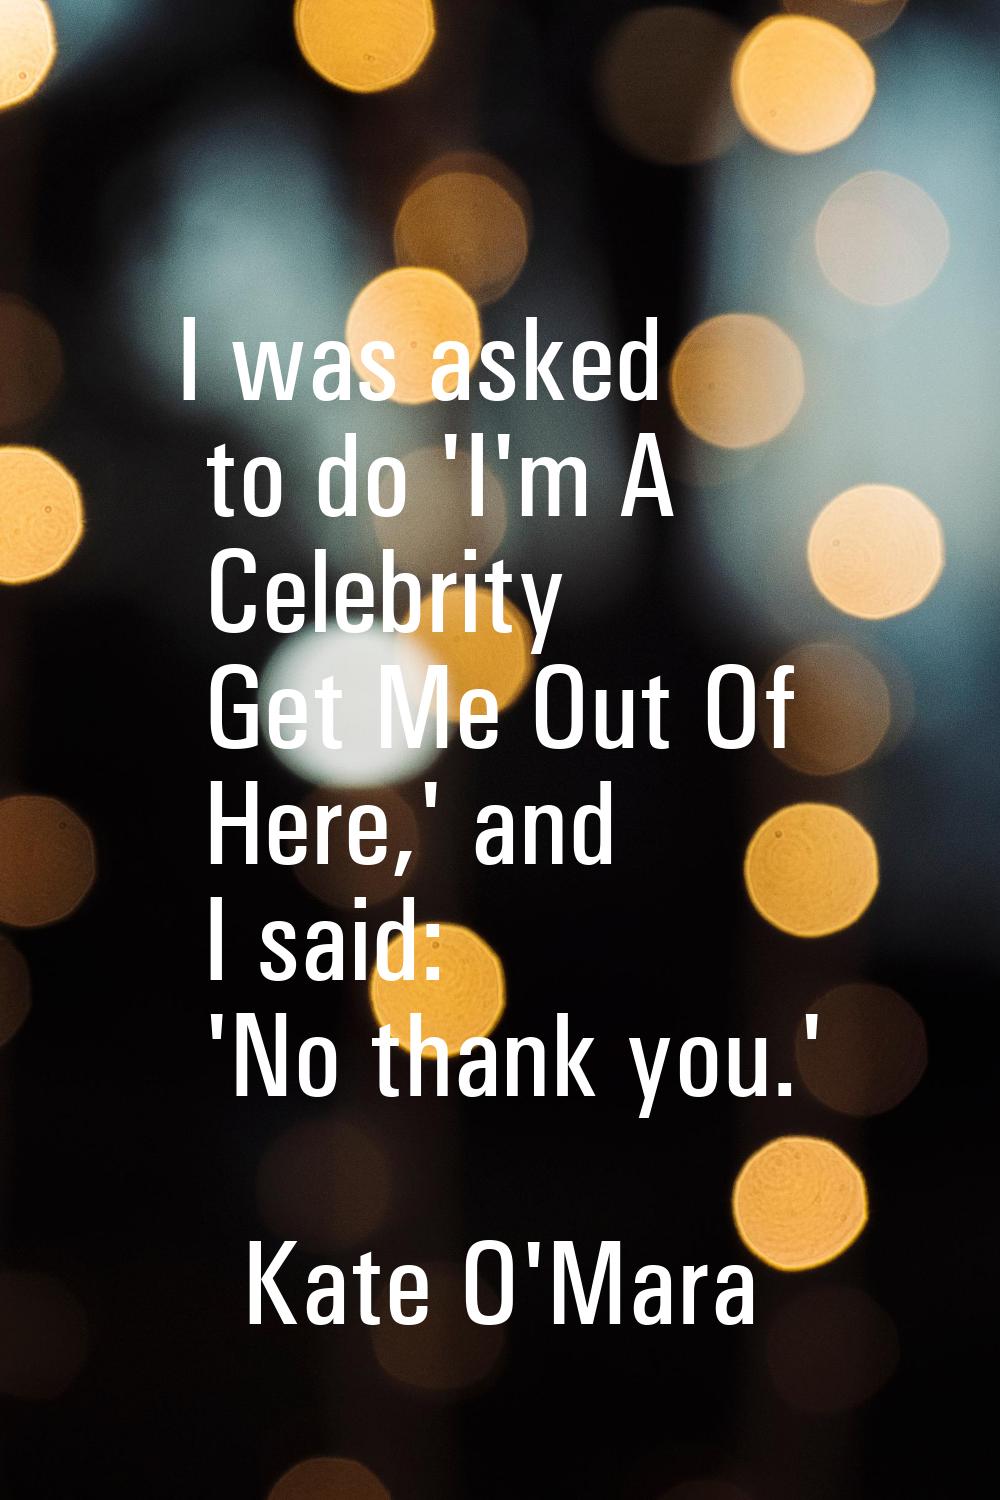 I was asked to do 'I'm A Celebrity Get Me Out Of Here,' and I said: 'No thank you.'